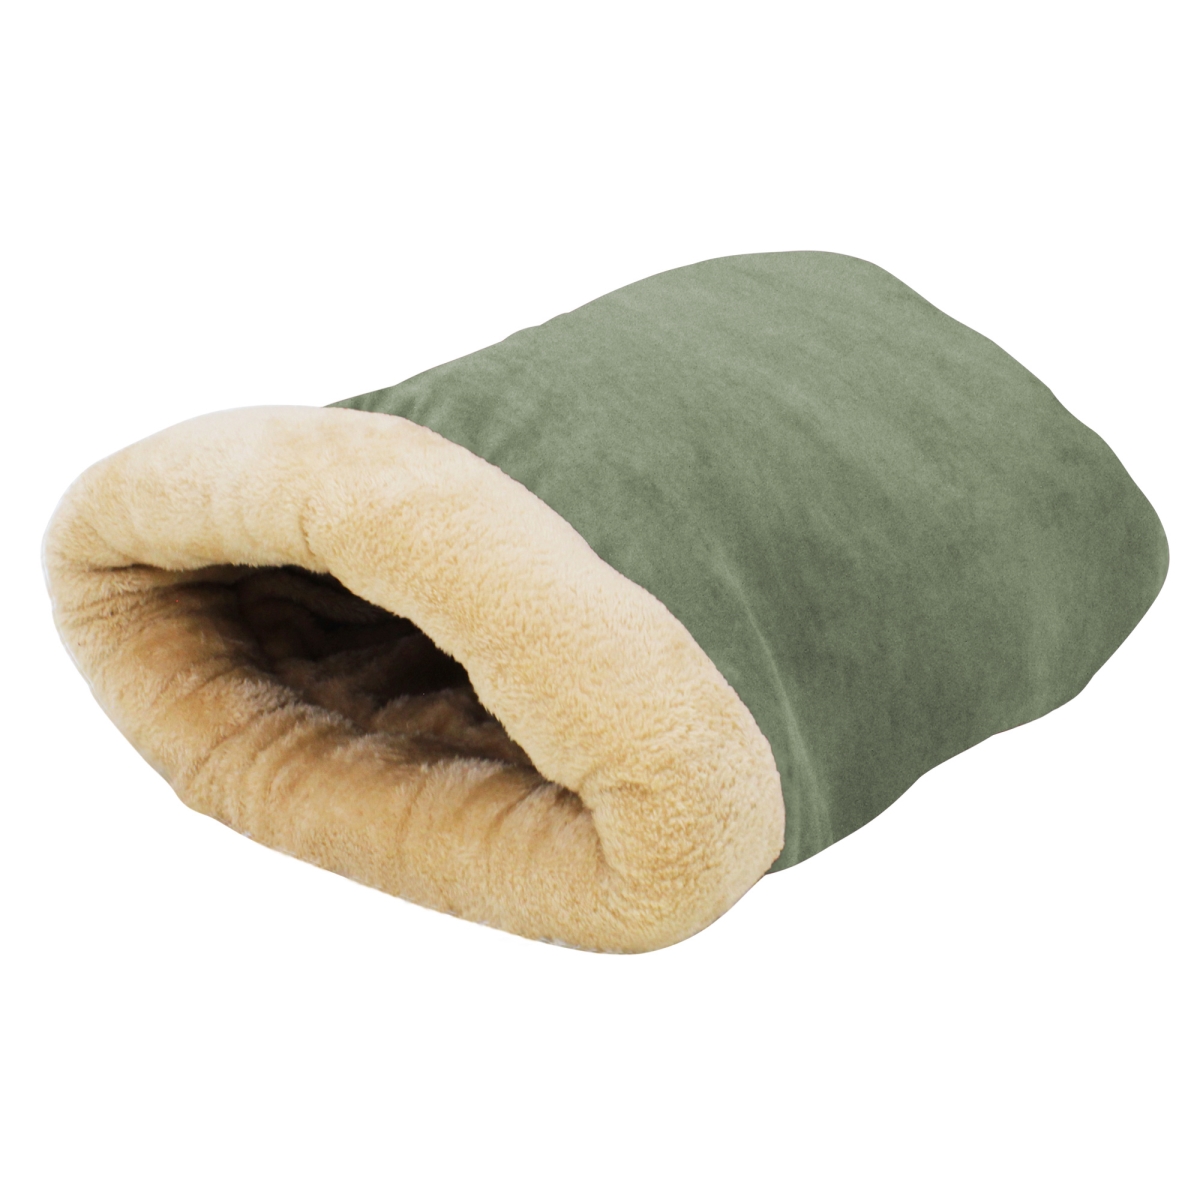 Picture of 212 Main CBD-2214SG Goopaws 4 in 1 Self-Warming Pet Bed, Sage Green